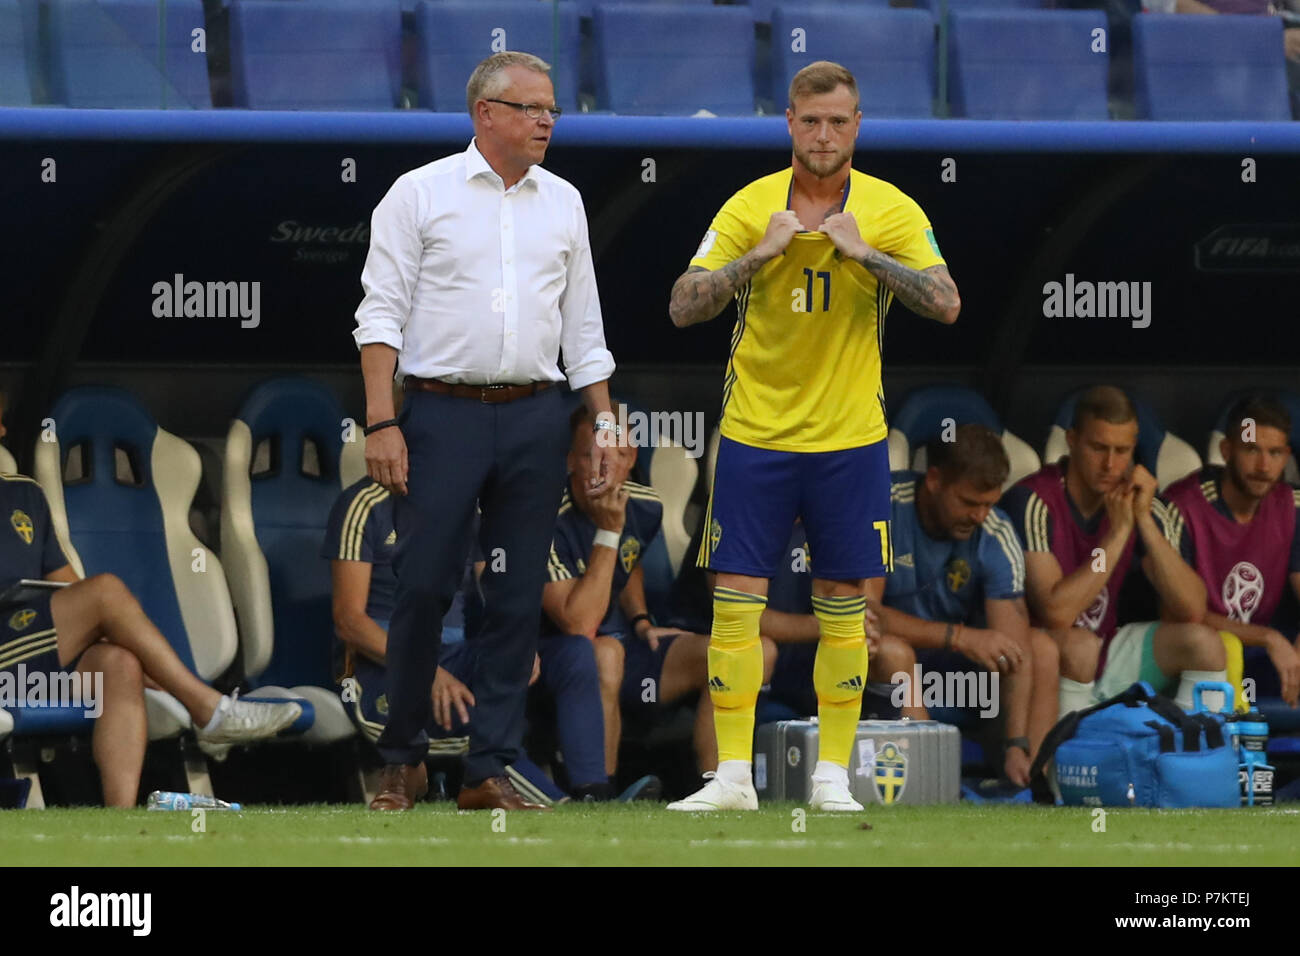 Samara, Russia. 7th July 2018.  Janne Andersson and John Guidetti during the match between Sweden and England for the quarterfinals of the 2018 World Cup held at the Samara Arena in Samara, Russia. (Photo: Ricardo Moreira/Fotoarena) Credit: Foto Arena LTDA/Alamy Live News Credit: Foto Arena LTDA/Alamy Live News Stock Photo